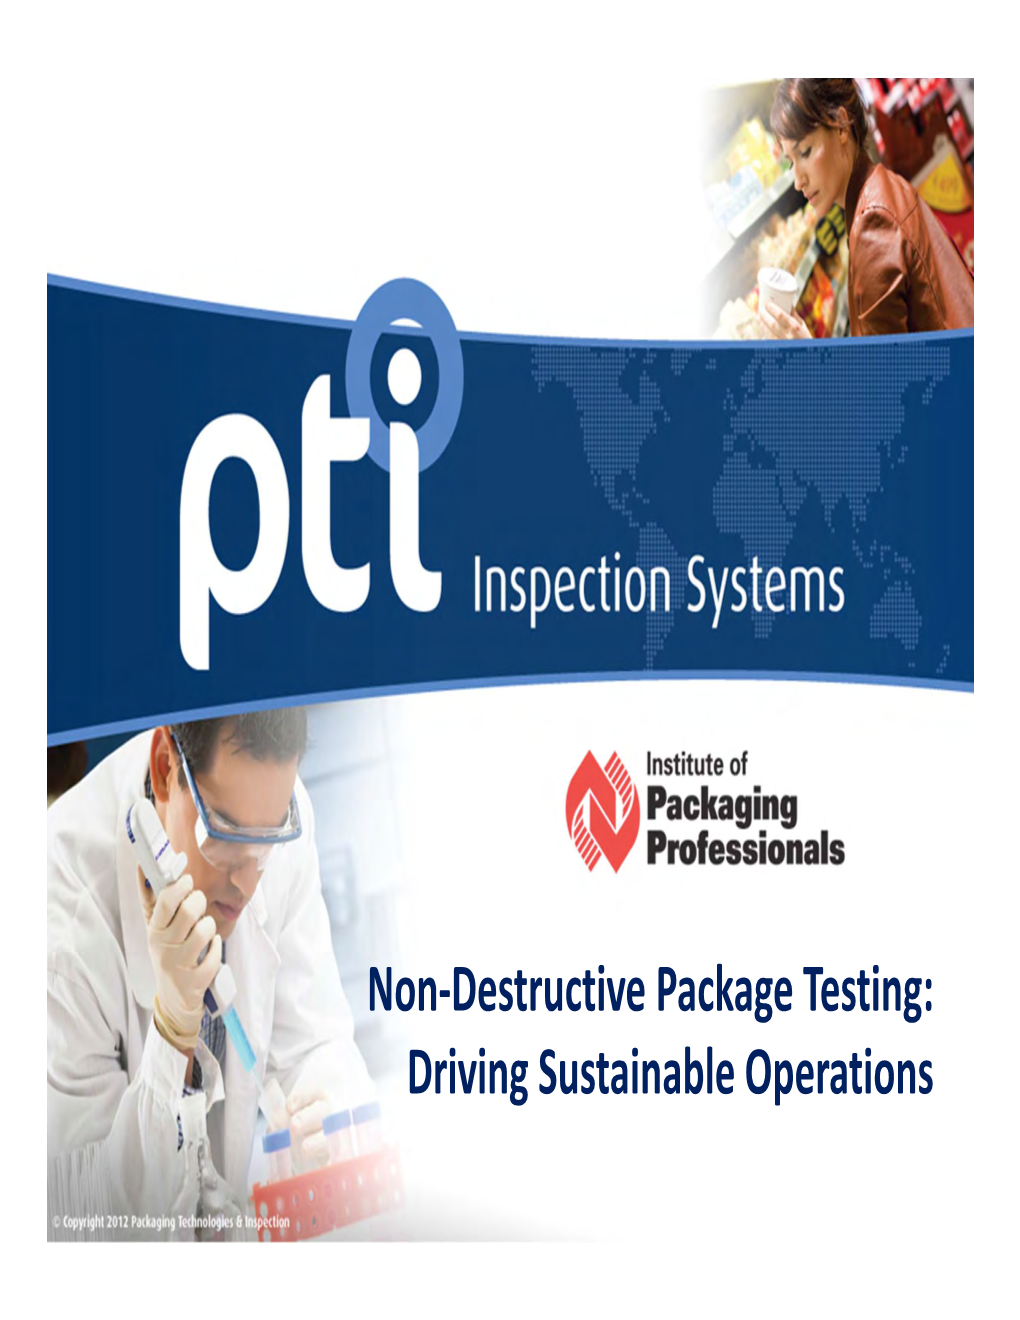 Non-Destructive Package Testing: Driving Sustainable Operations